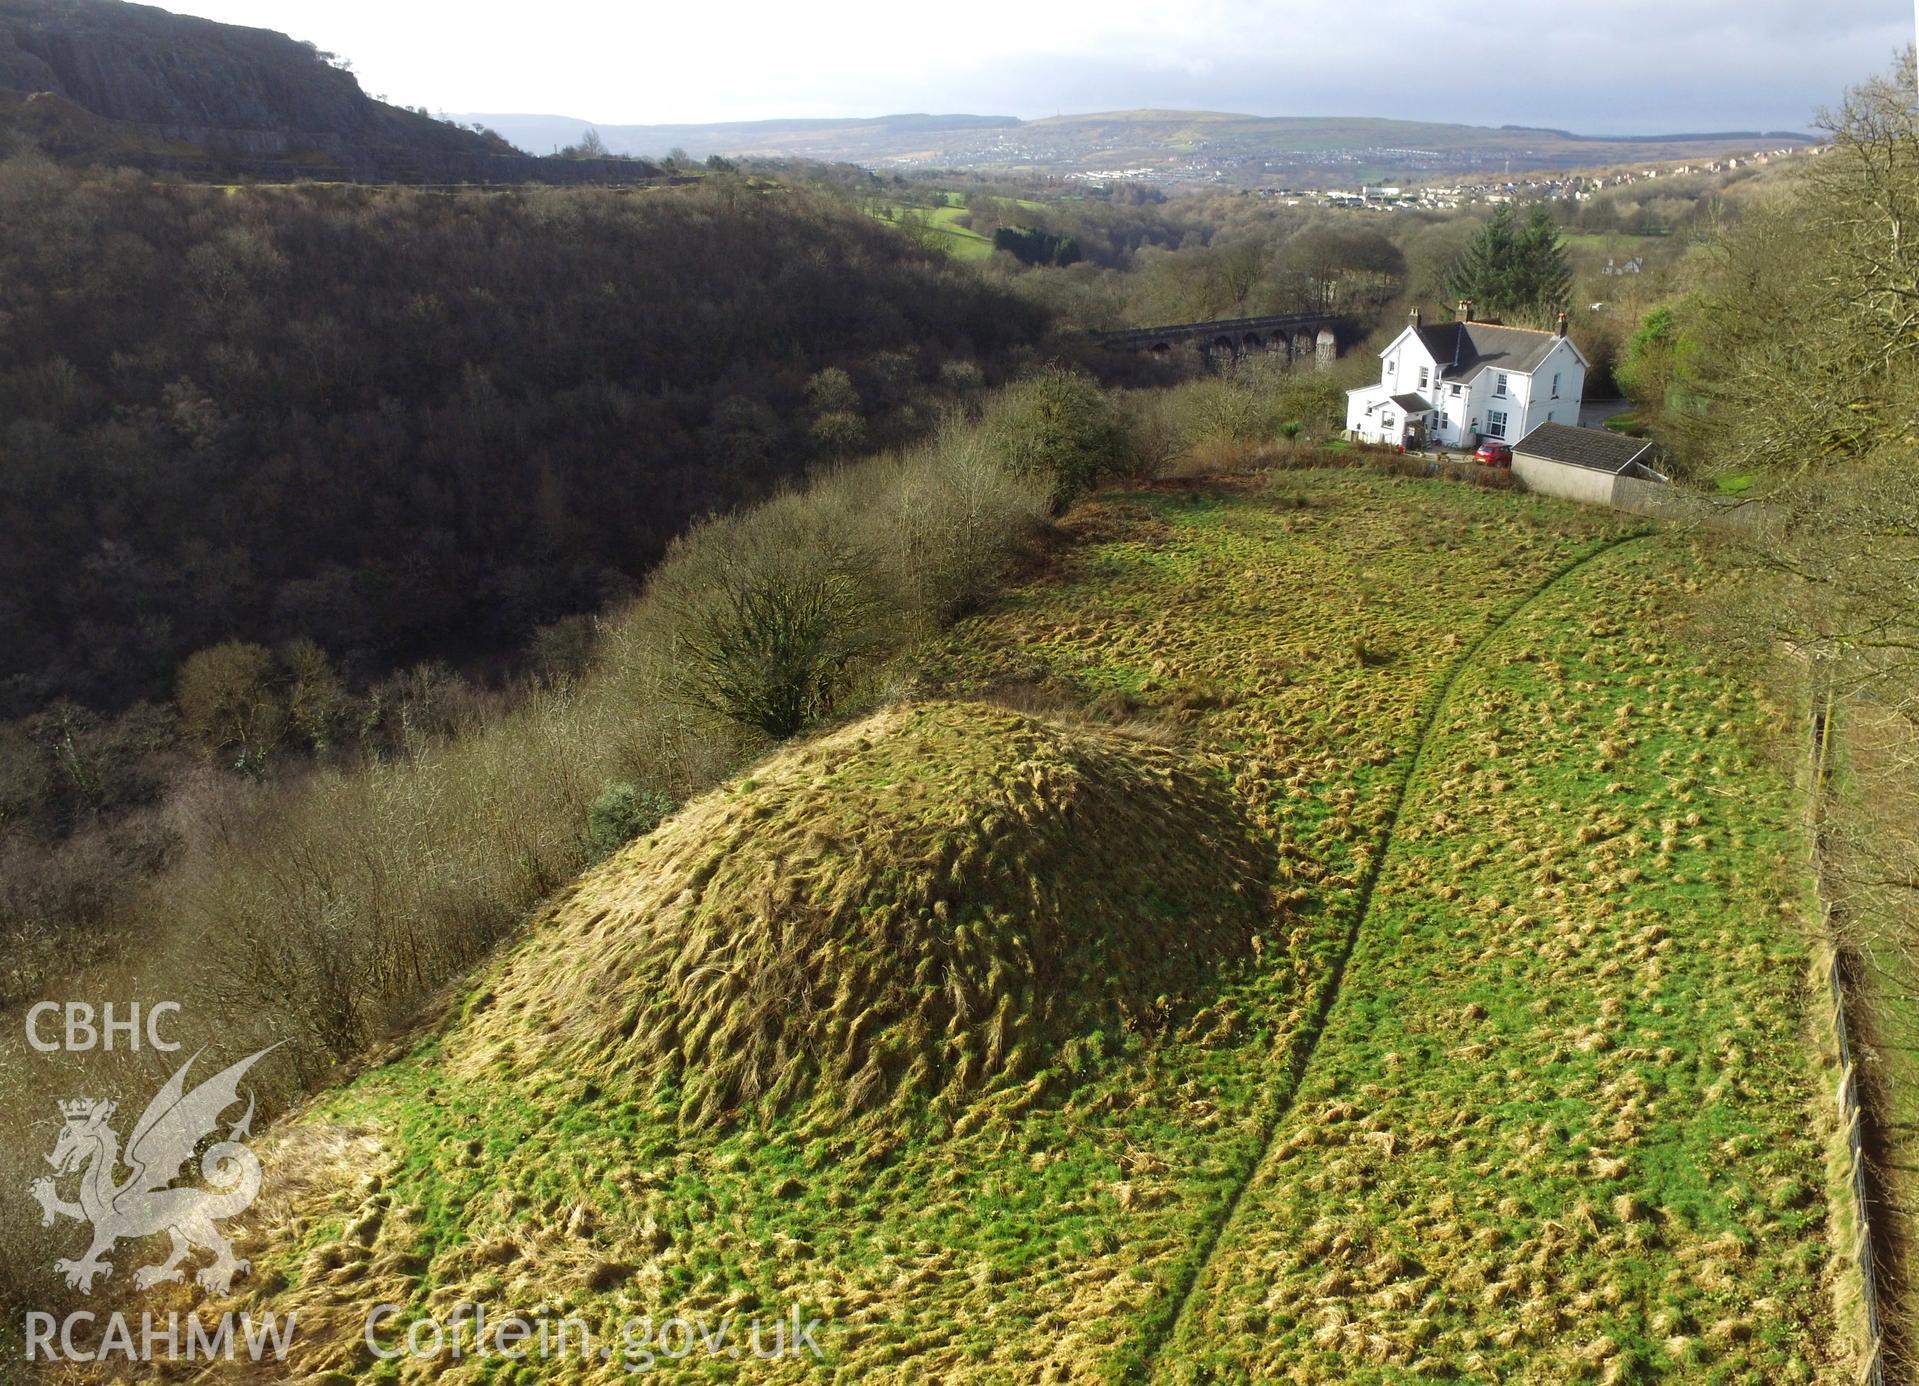 Colour photo showing mound at Cae Burdydd, produced by  Paul R. Davis,  4th February 2017.